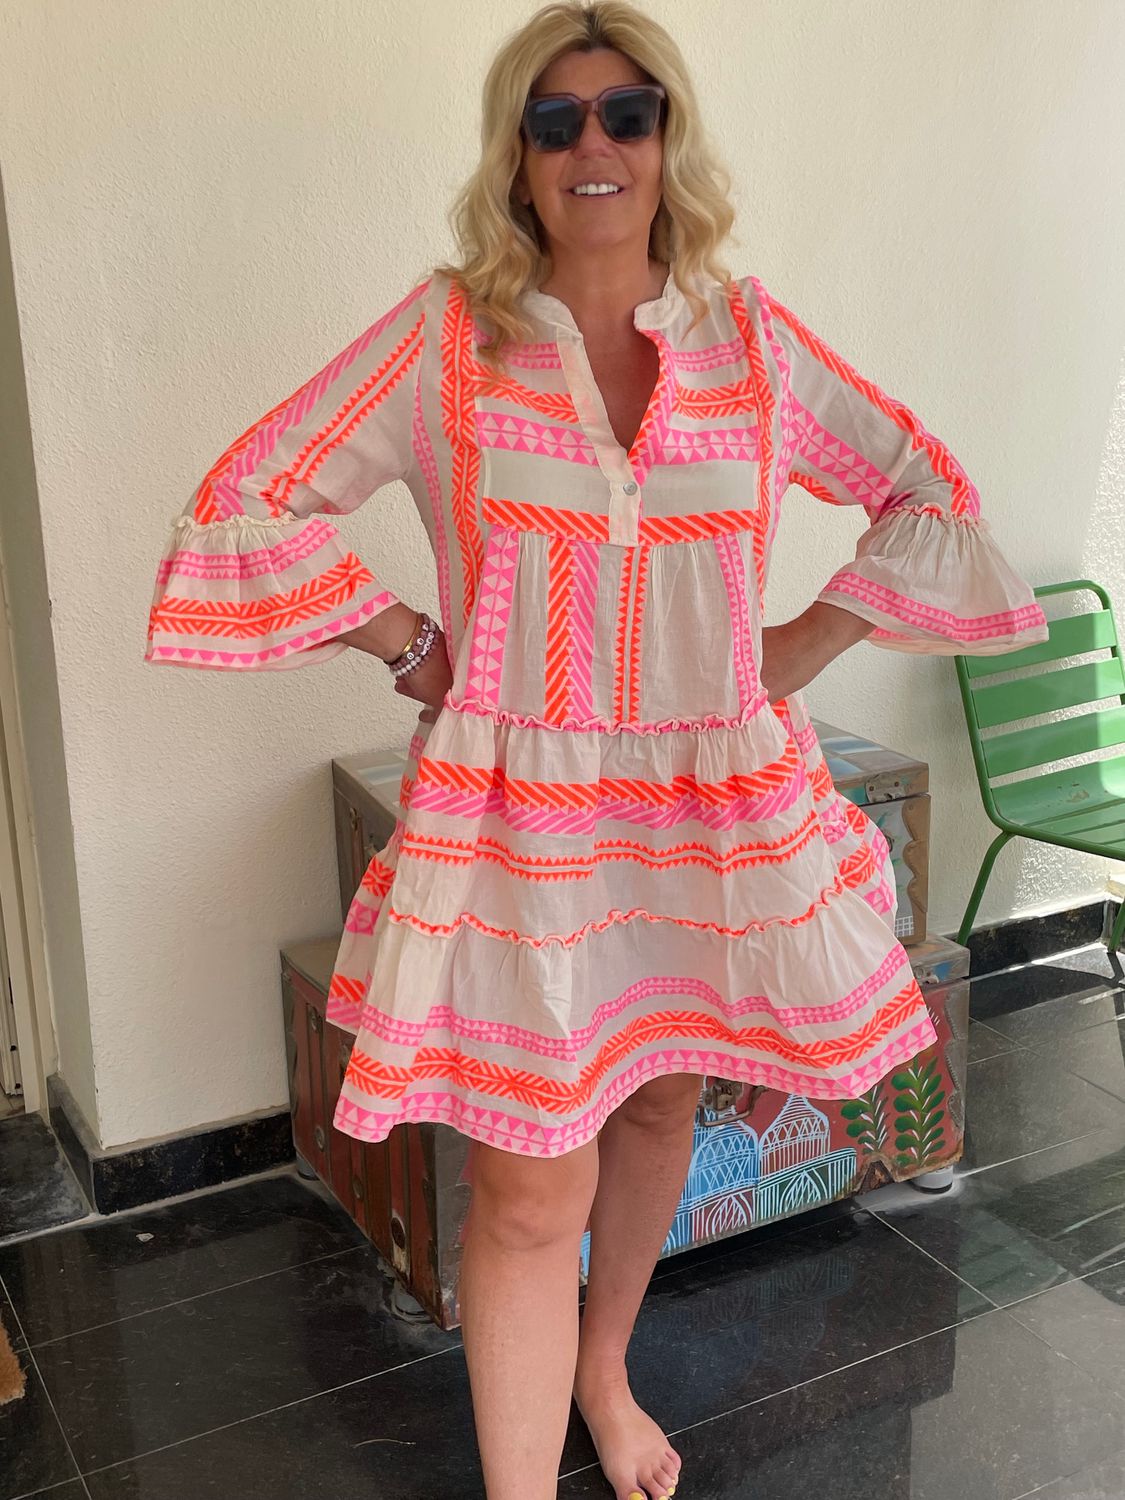 Our Famous Aztec Smock Dress in Neon Pink and Orange